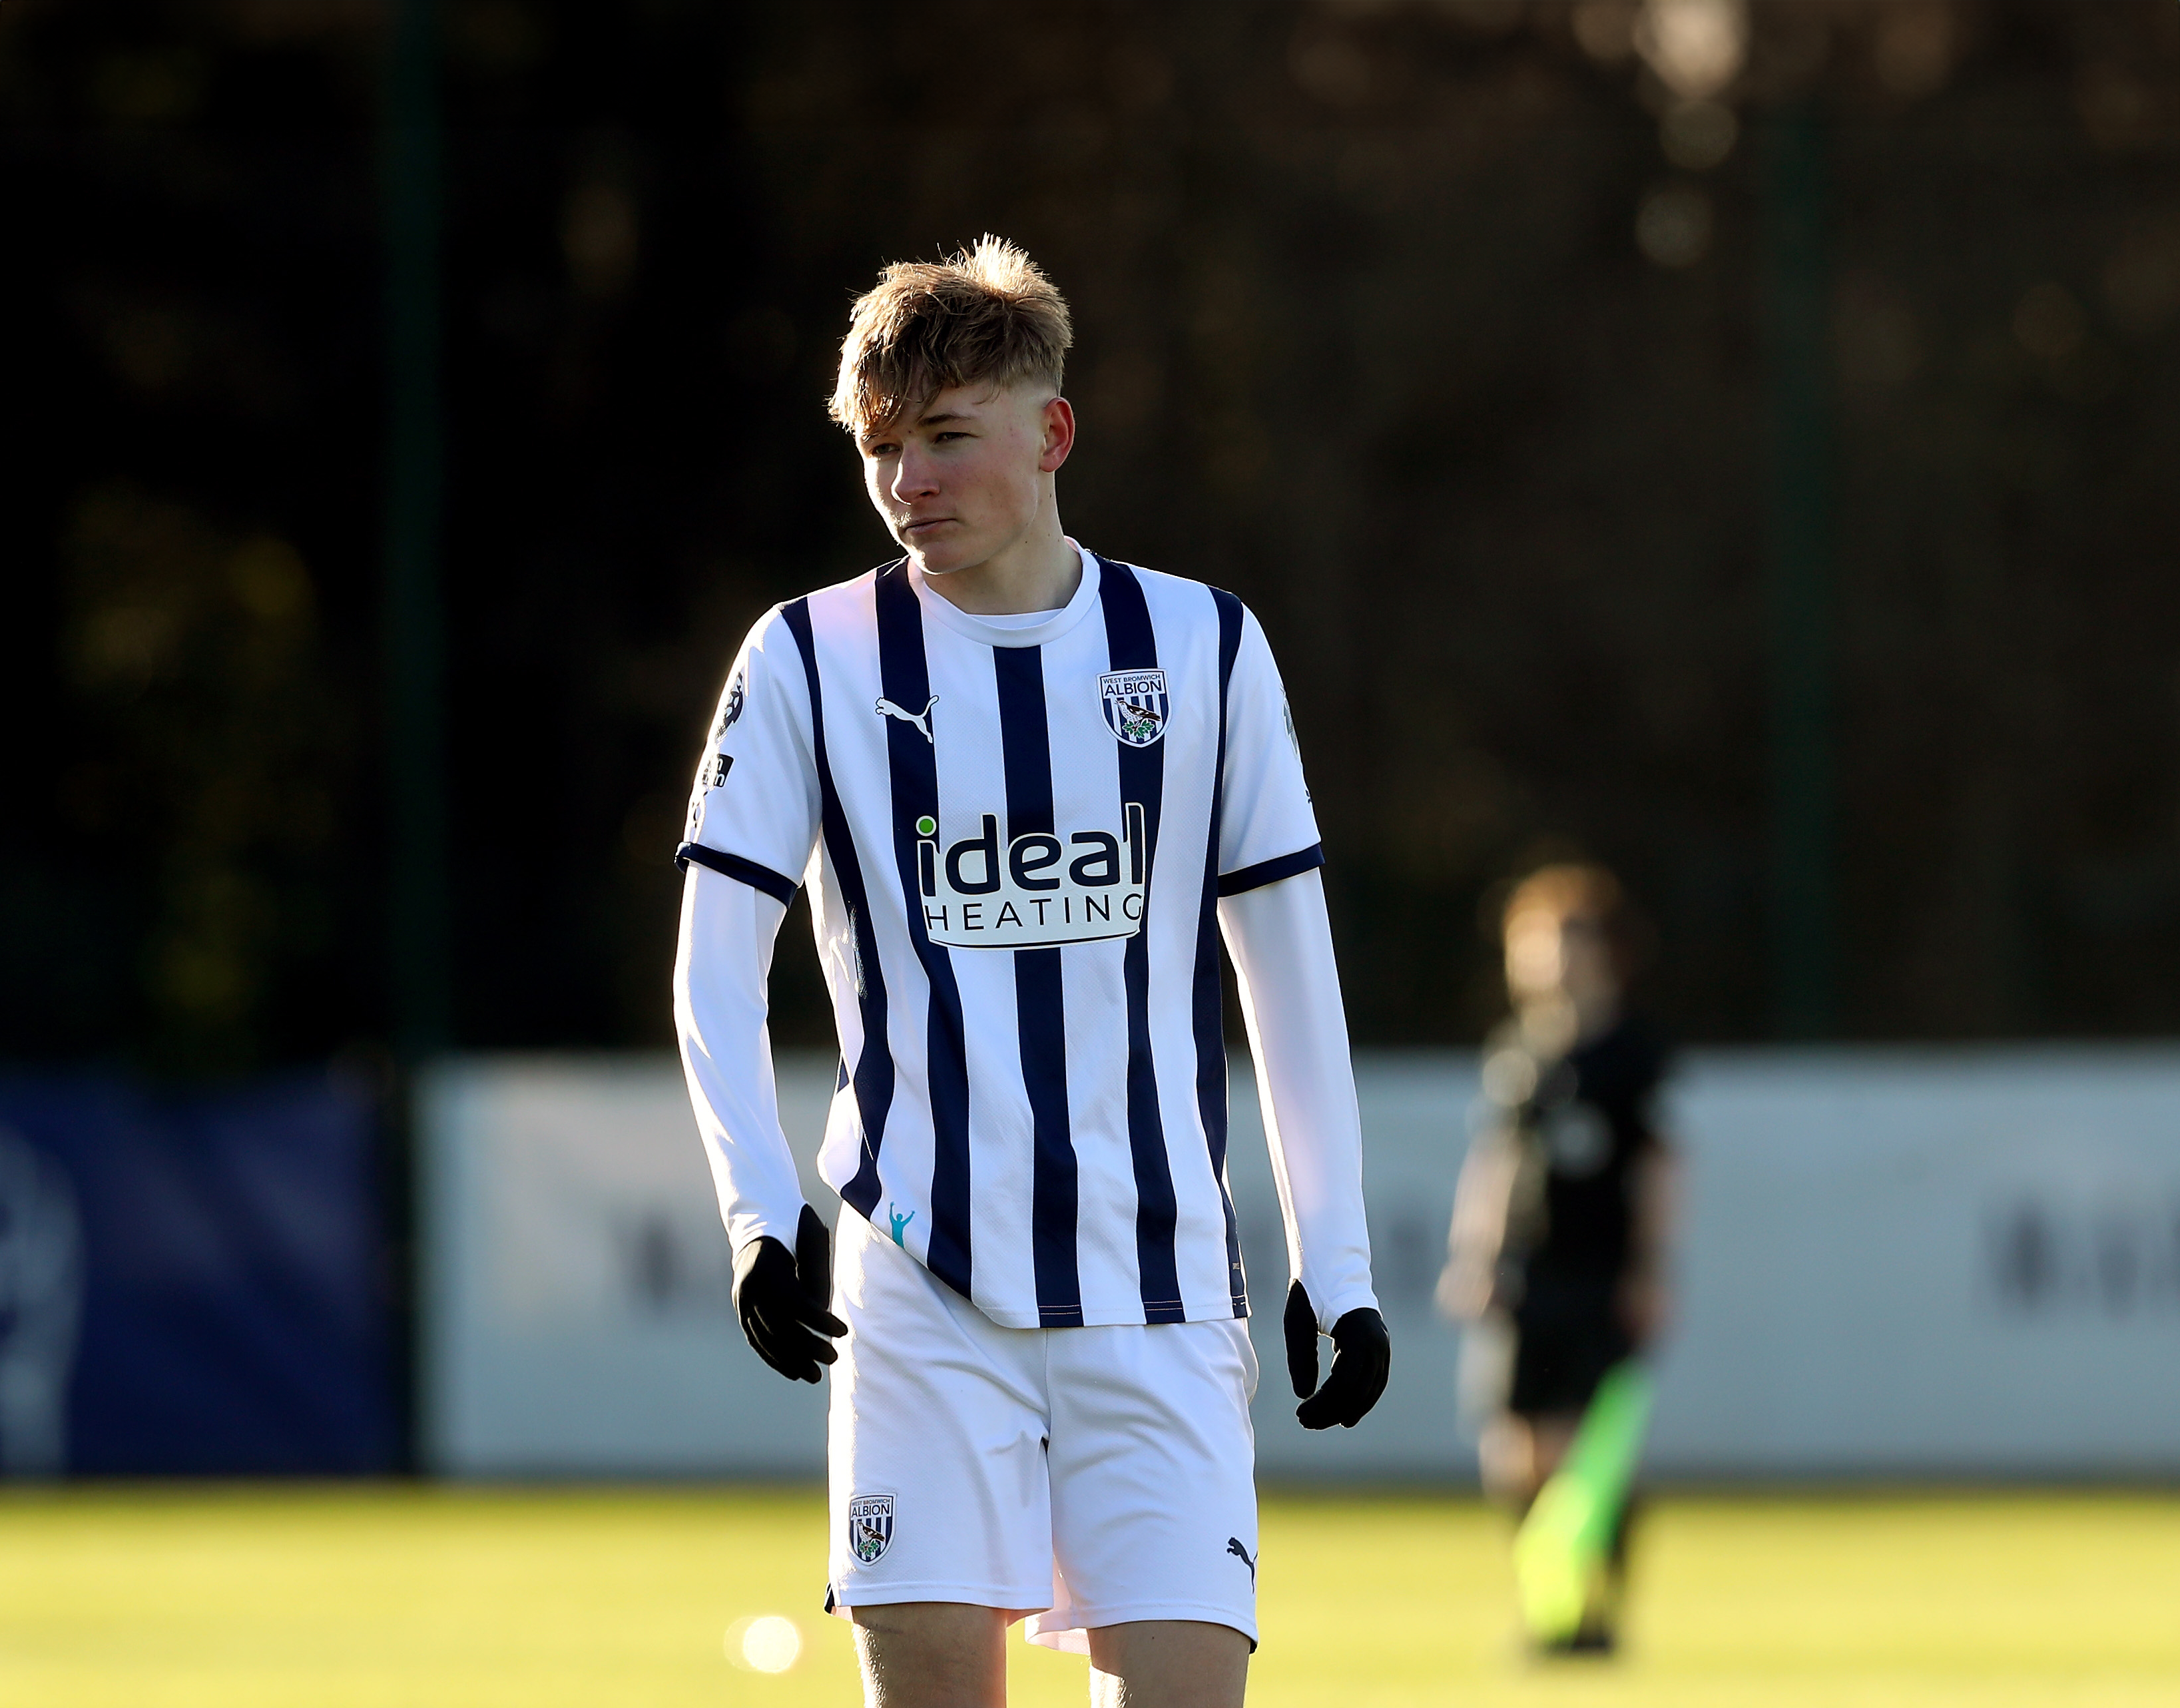 A photo of Albion U18s midfielder Ollie Bostock, wearing the 2023/24 home kit, in action at the club's training ground